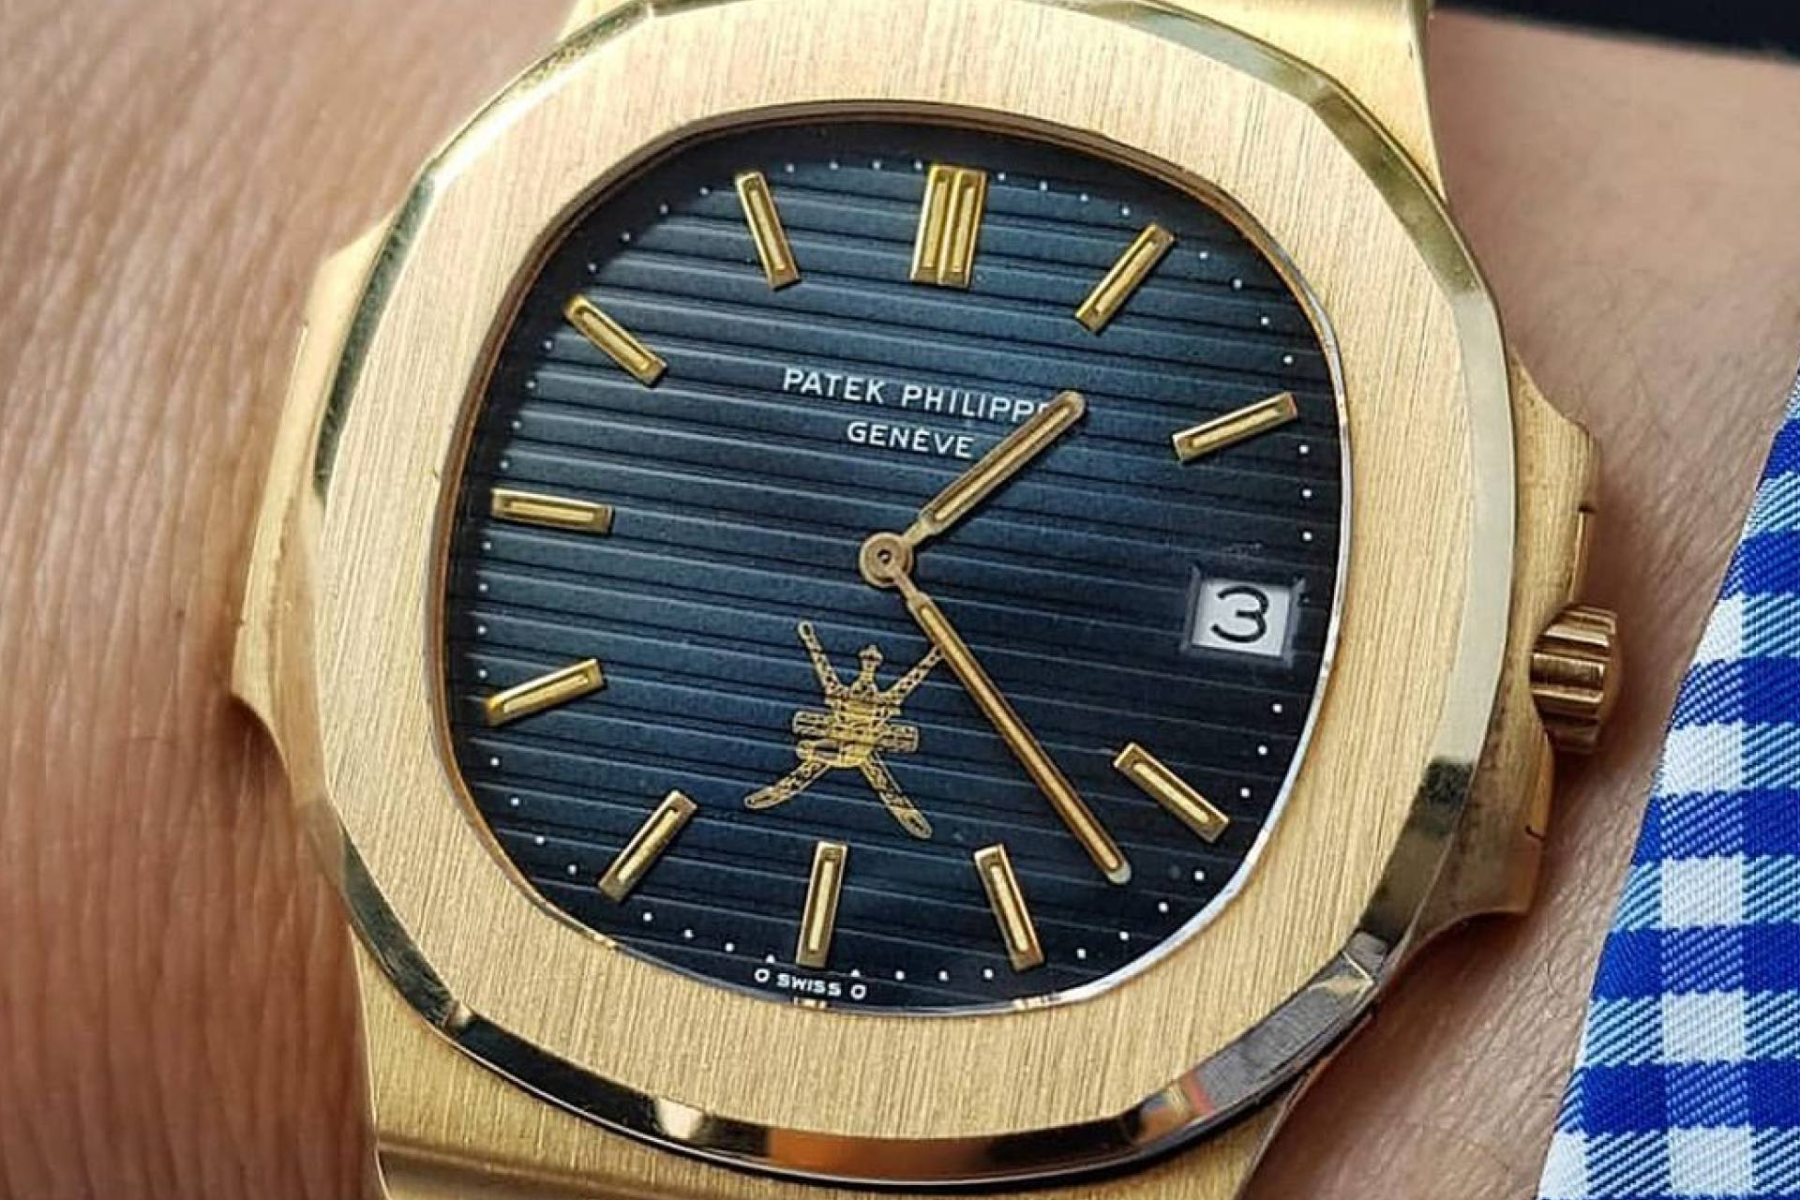 Actor Shawn Yue Man-lok’s impressive vintage watch collection includes the Patek Philippe Nautilus 3700J with a khanjar dagger on the dial